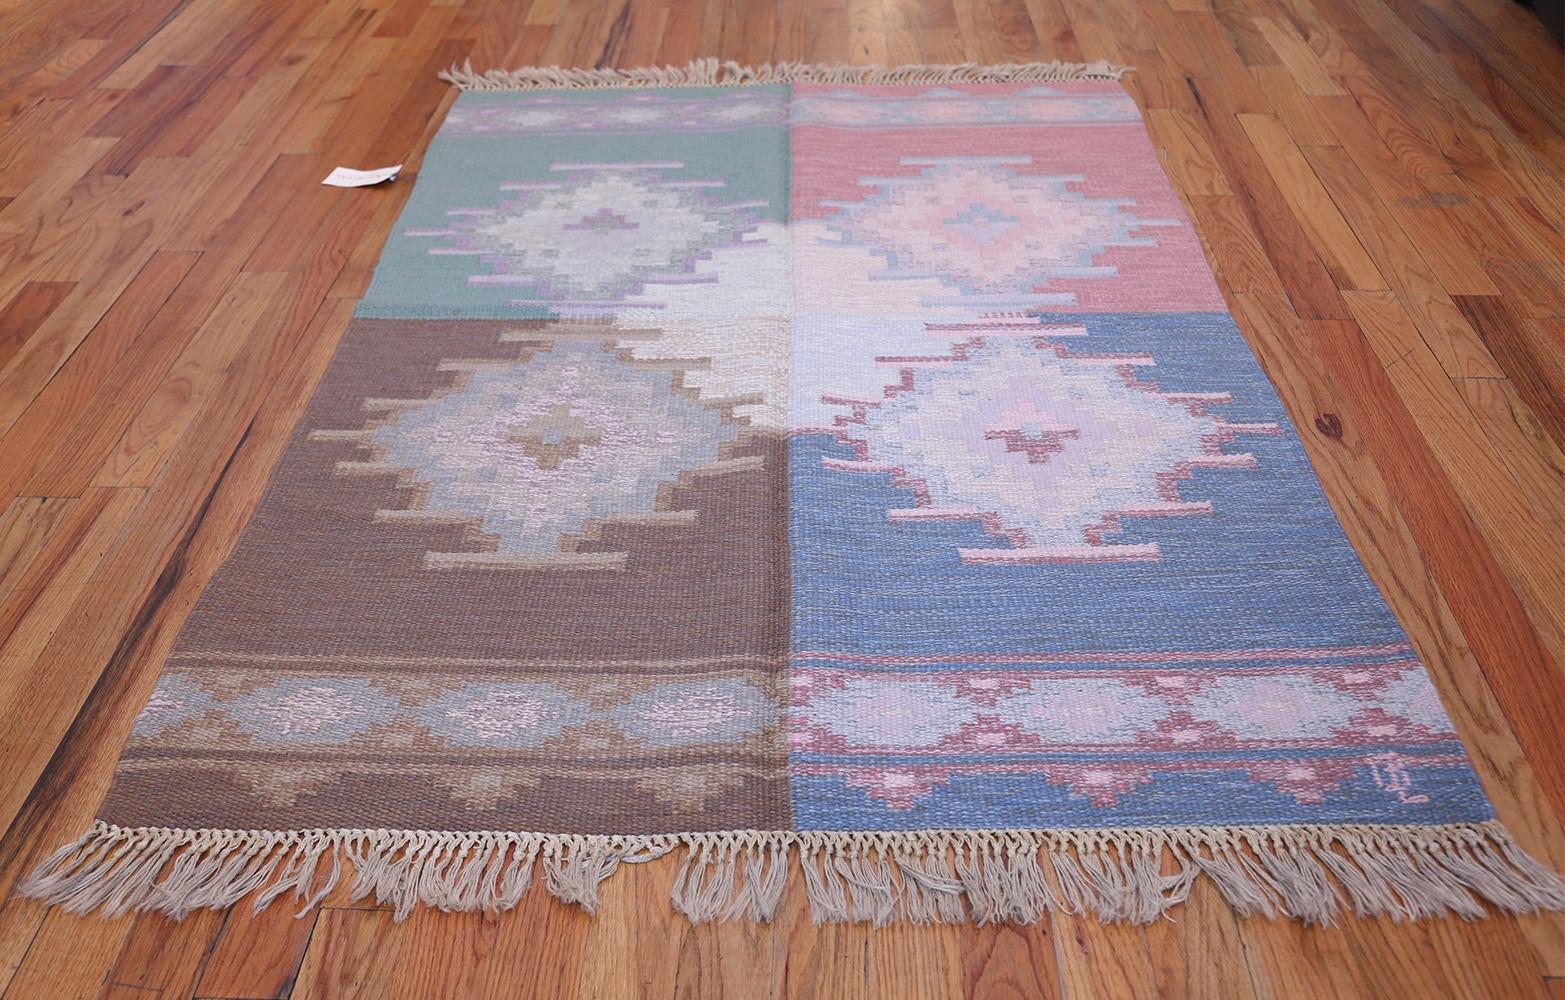 Vintage Swedish Flat-Woven Kilim. Size: 4 ft 5 in x 6 ft 8 in (1.35 m x 2.03 m) 3